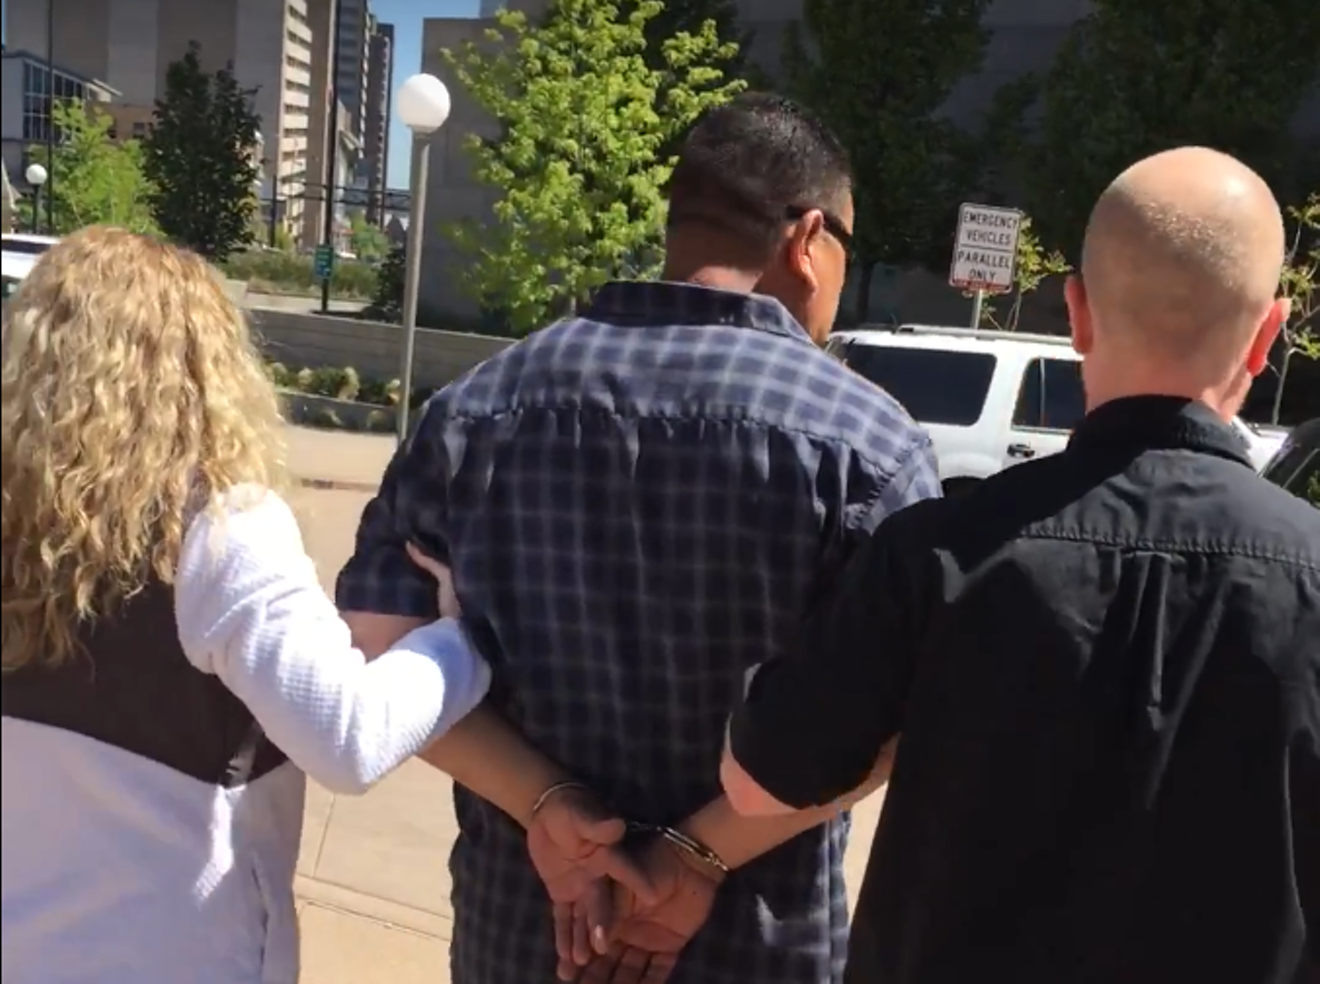 A screen shot from one of the videos showing ICE agents making arrests outside the Lindsey Flanigan Courthouse.